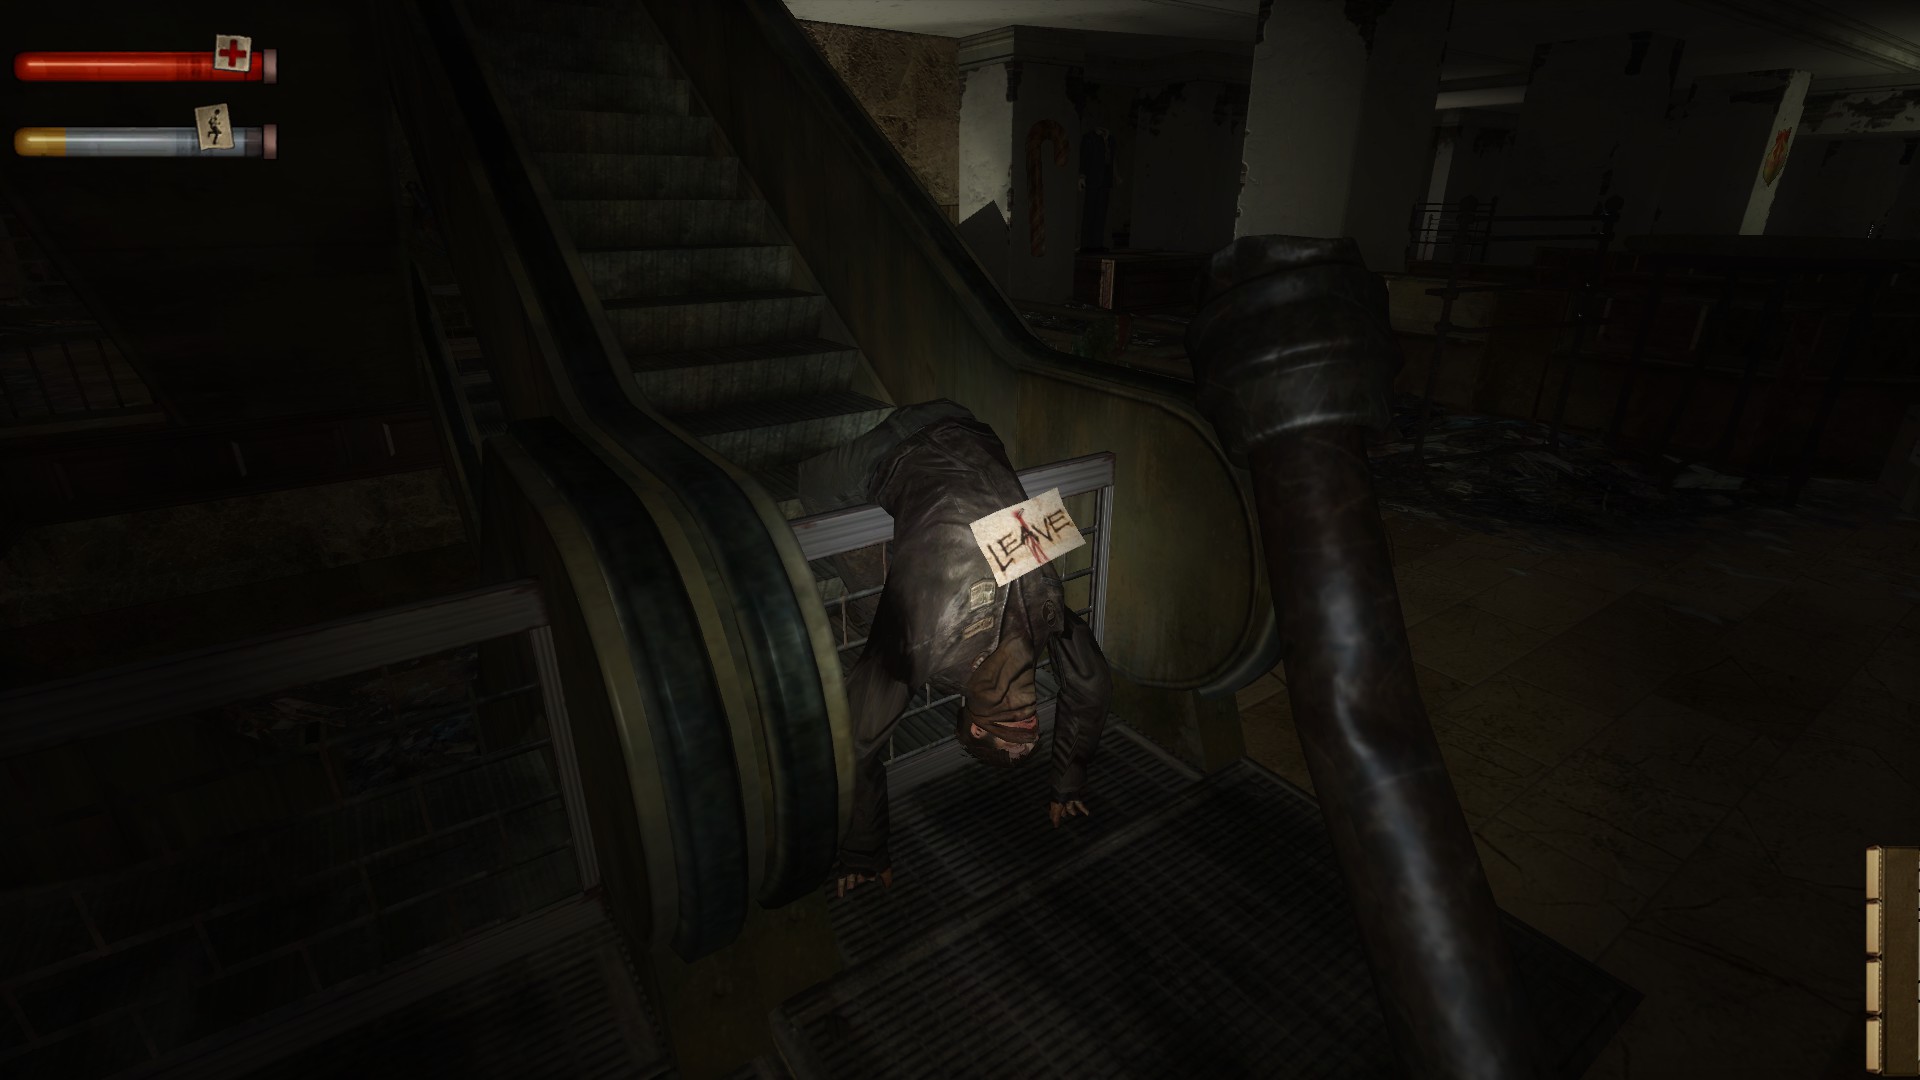 Screenshot of the corpse on the escalator with LEAVE written on it in the department store in Condemned